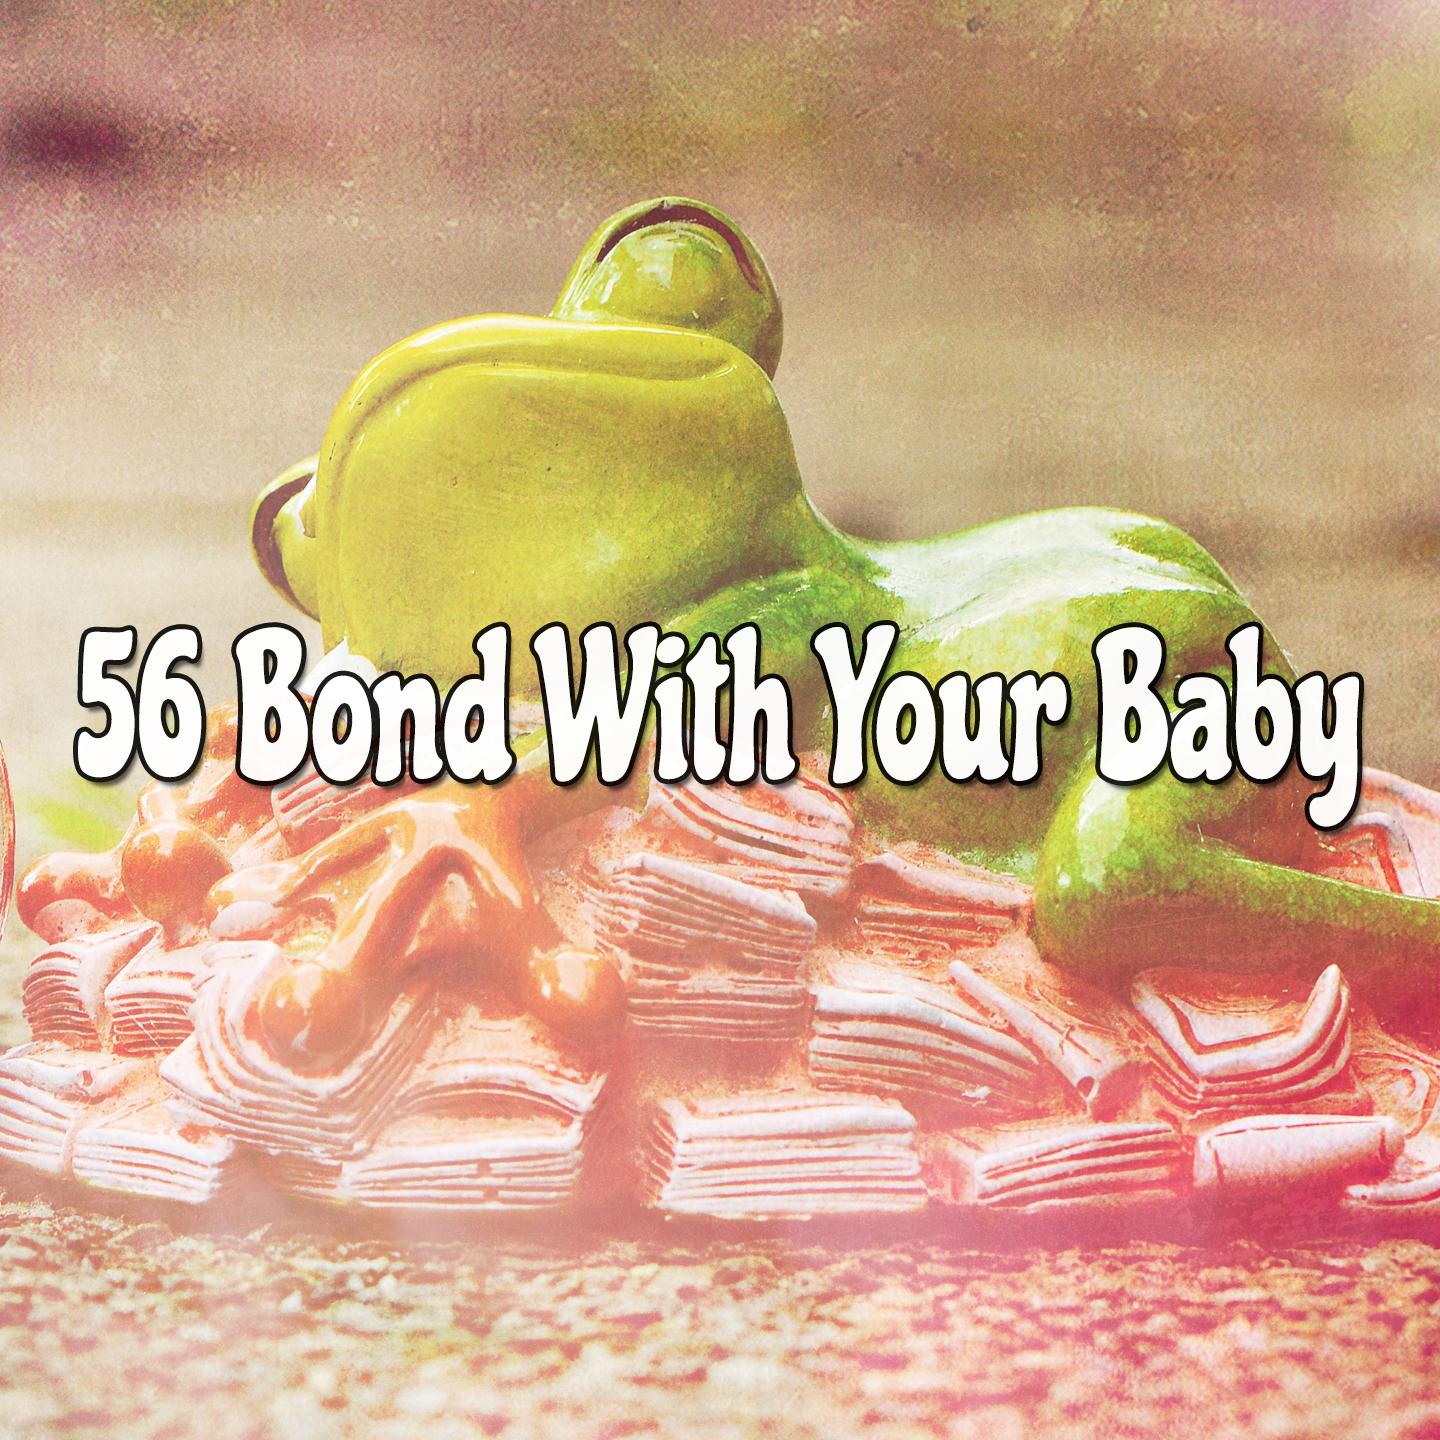 56 Bond With Your Baby